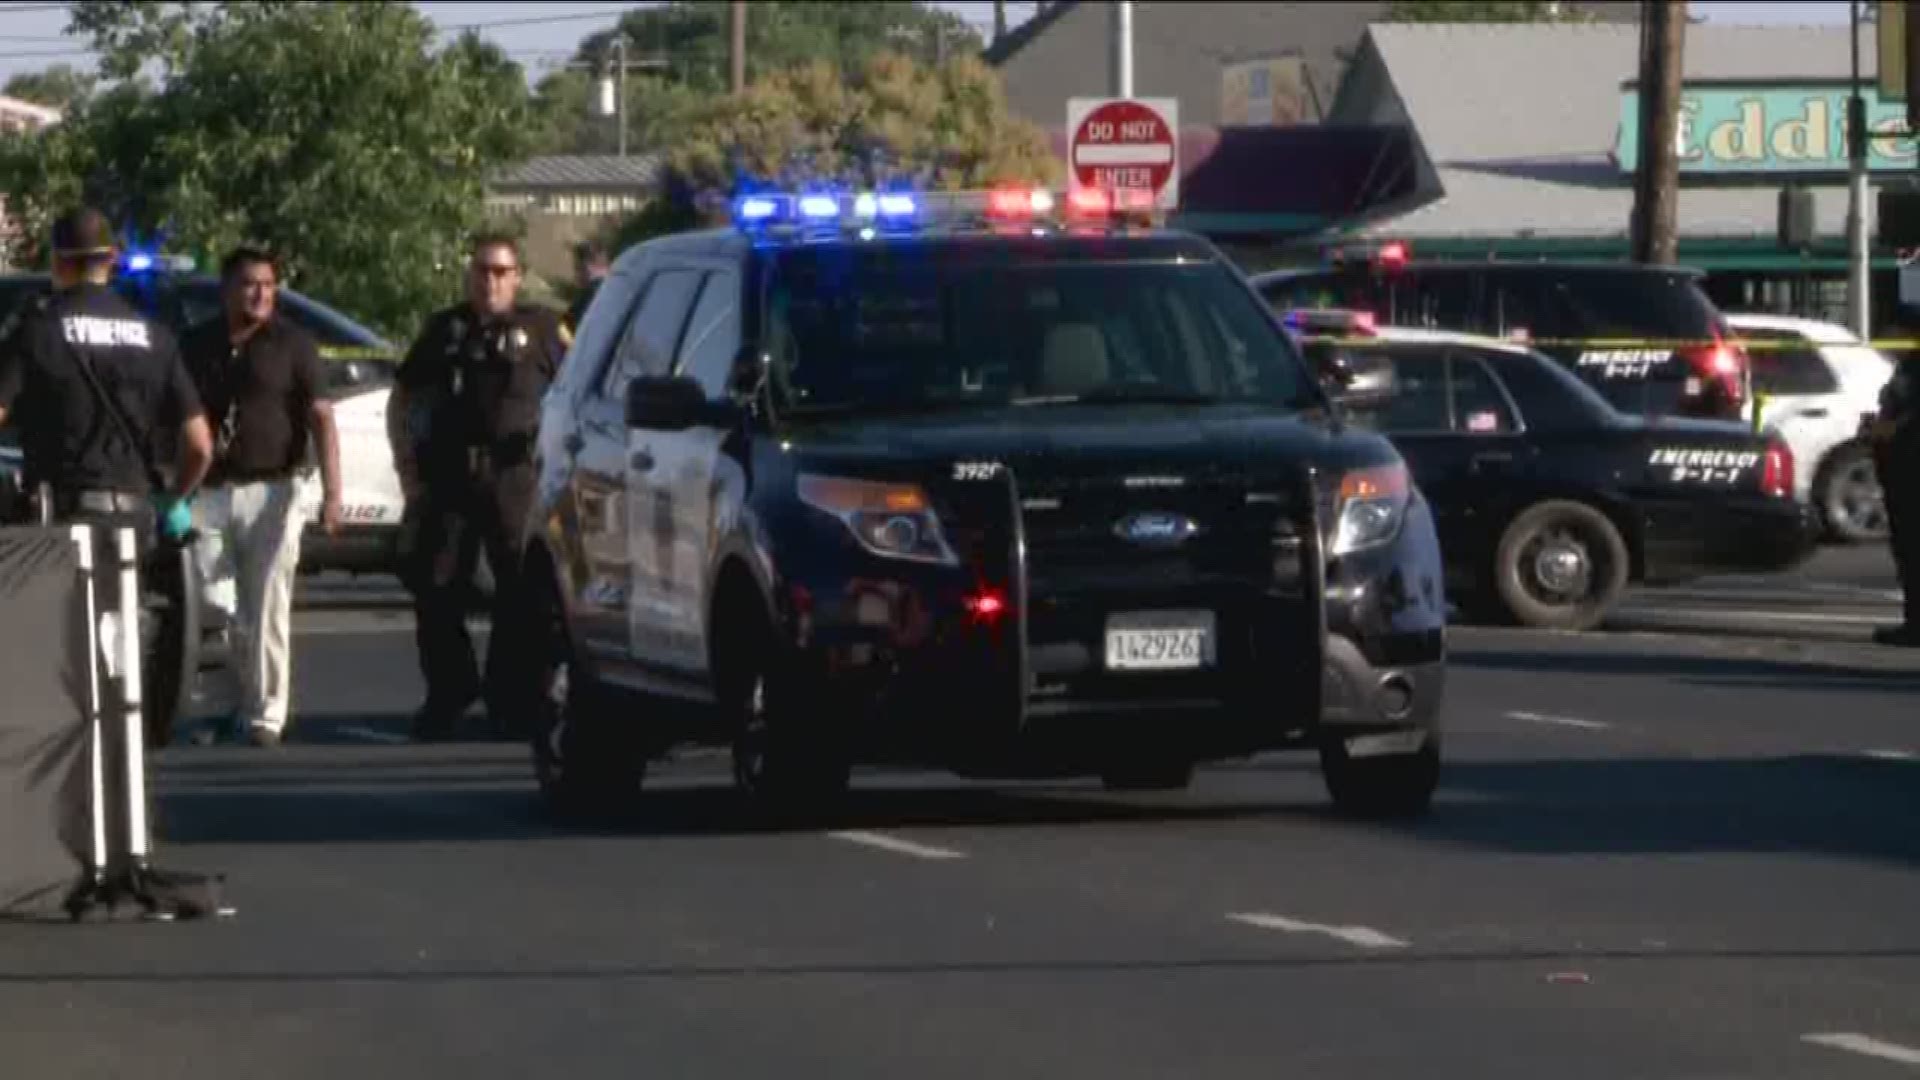 Stockton Crime: Rate of theft crimes increased in 2018 | abc10.com